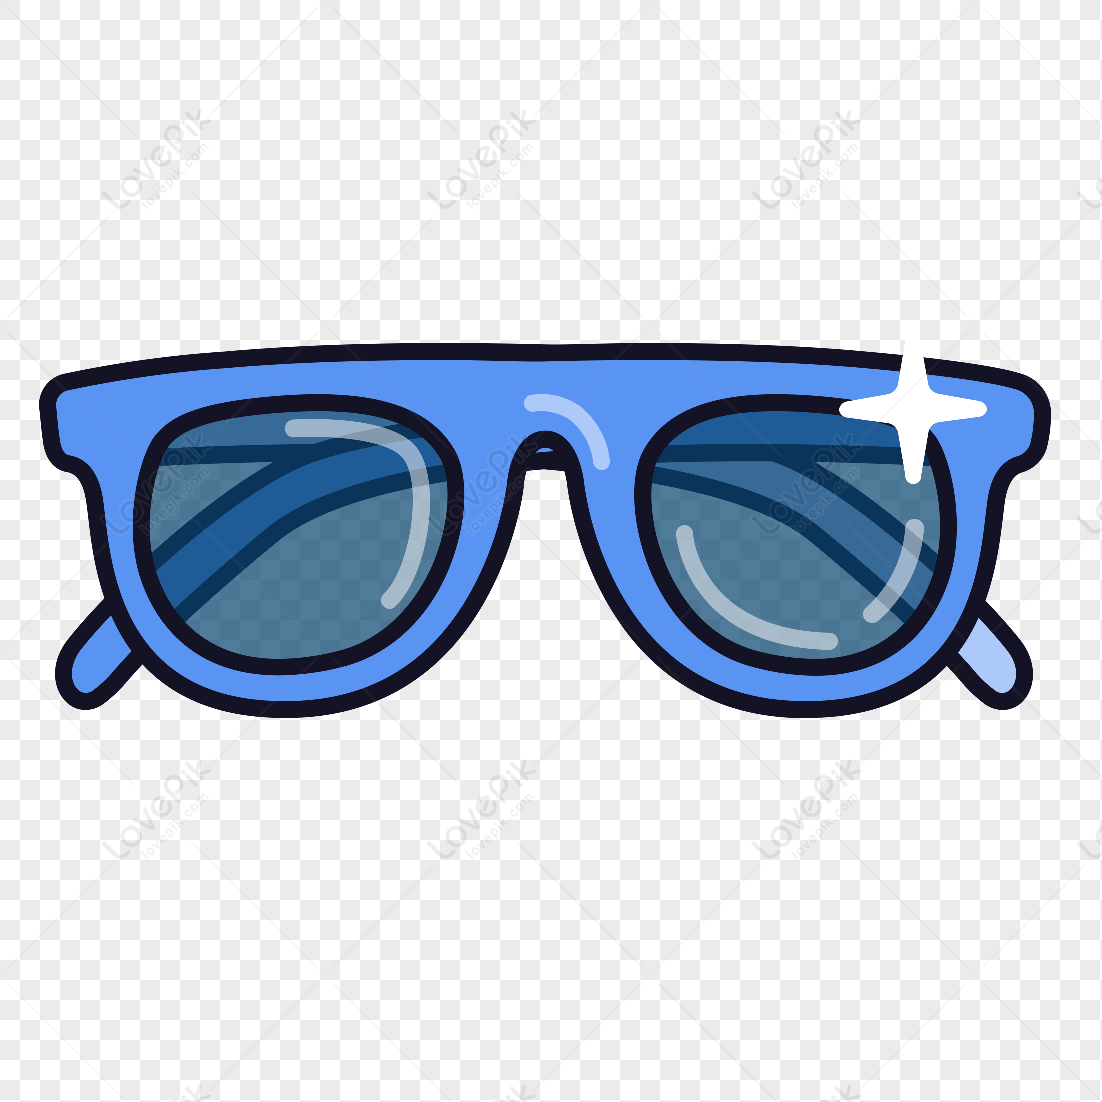 glasses vector free download